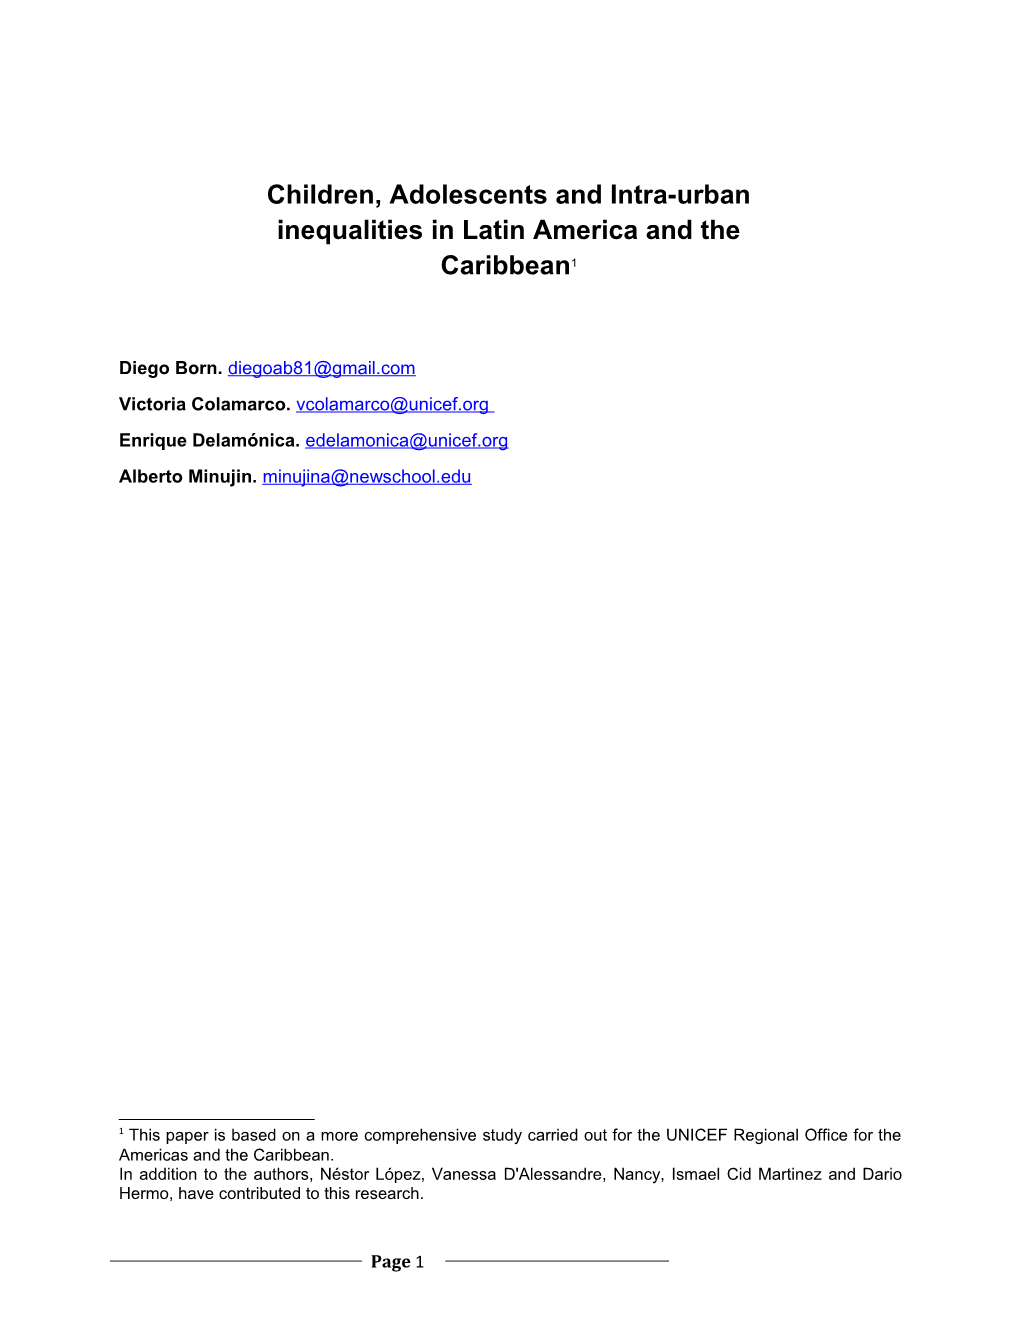 Children, Adolescents and Intra-Urban Inequalities in Latin America and the Caribbean 1